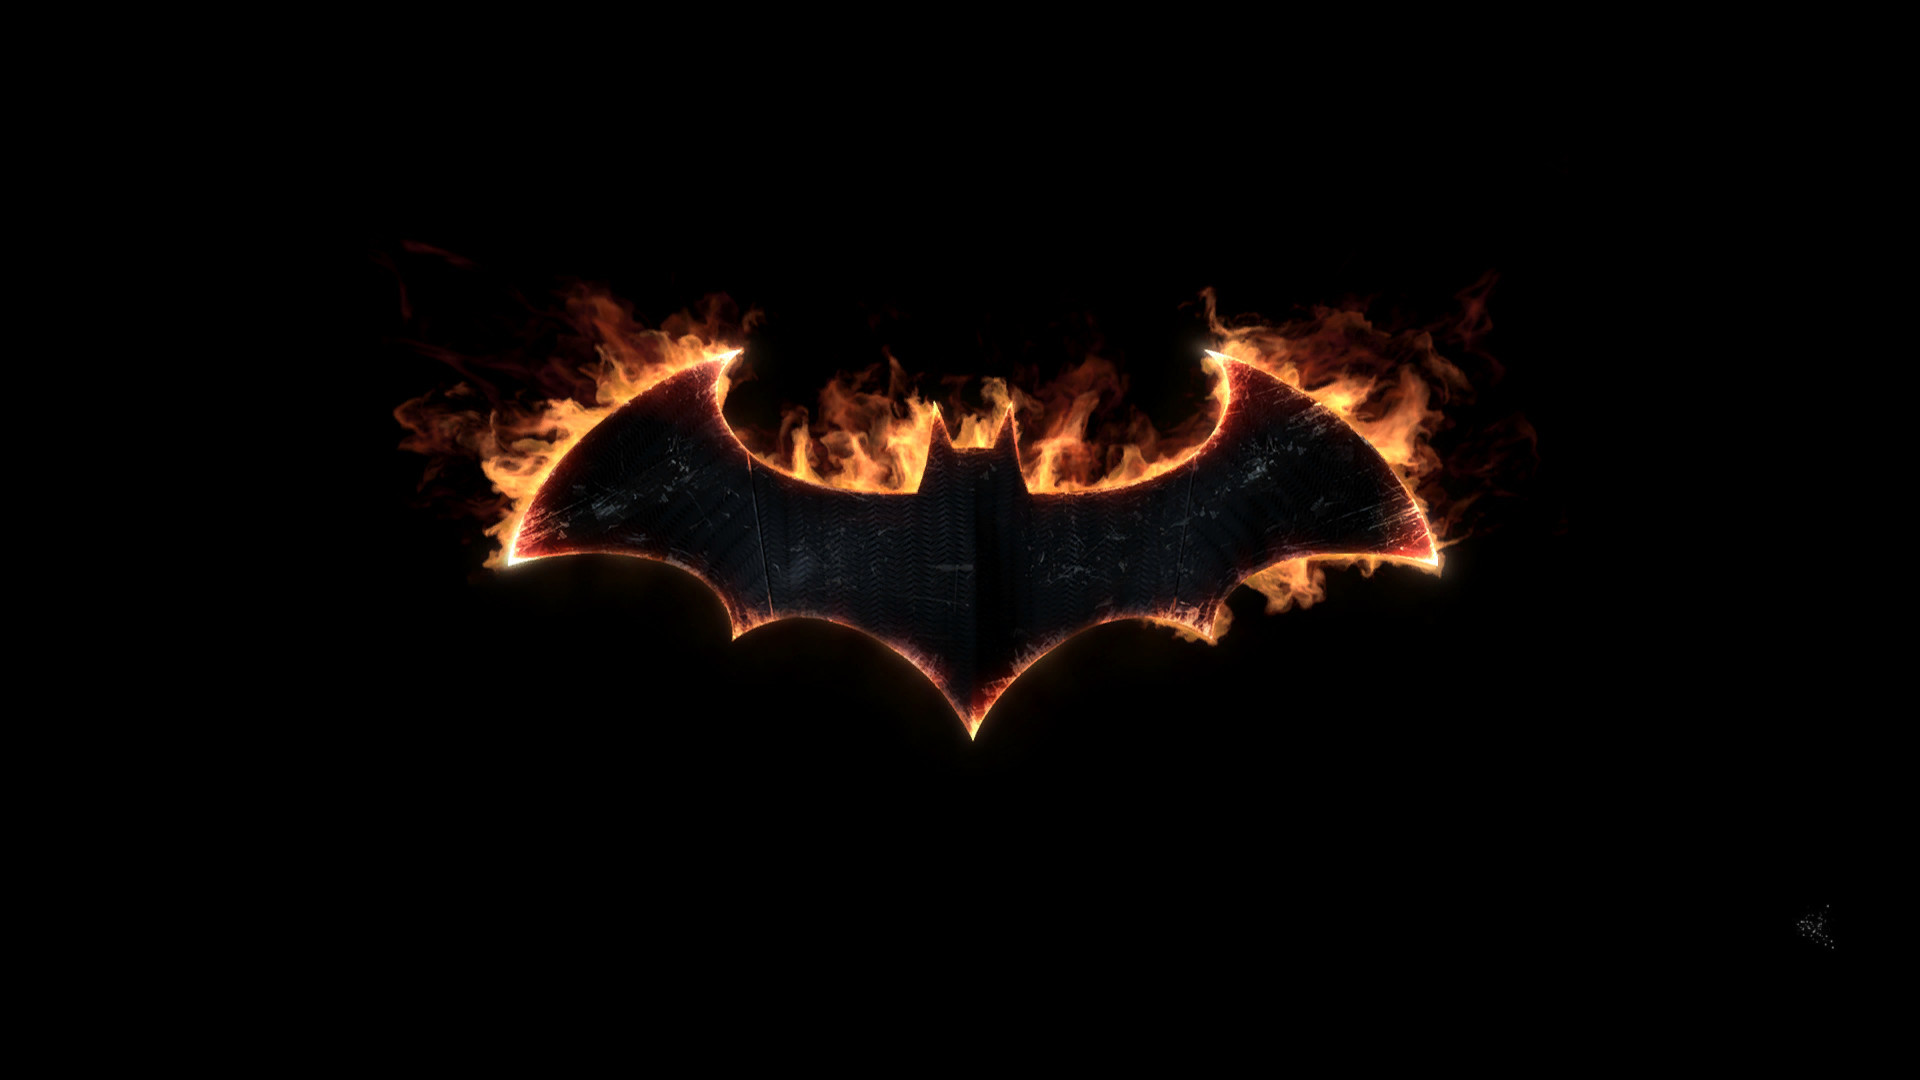 1920x1080 Best Collections of Batman Symbol Wallpaper 76+ For Desktop, Laptop and  Mobiles. Here at hdwallpaper20.com You Can Download More than Three Million  ...